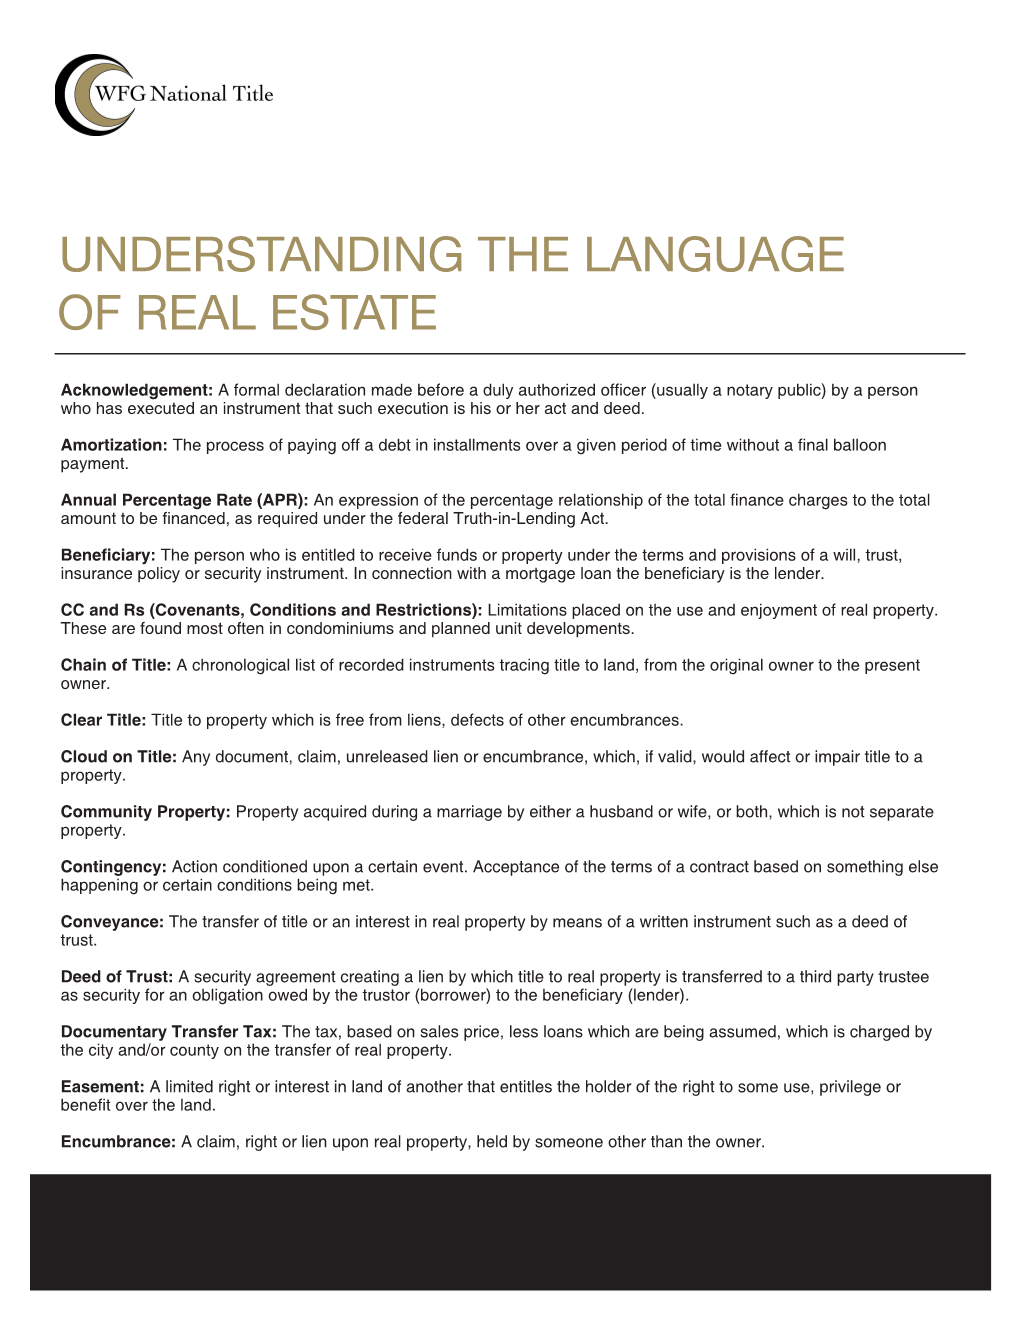 Of Real Estate Understanding the Language